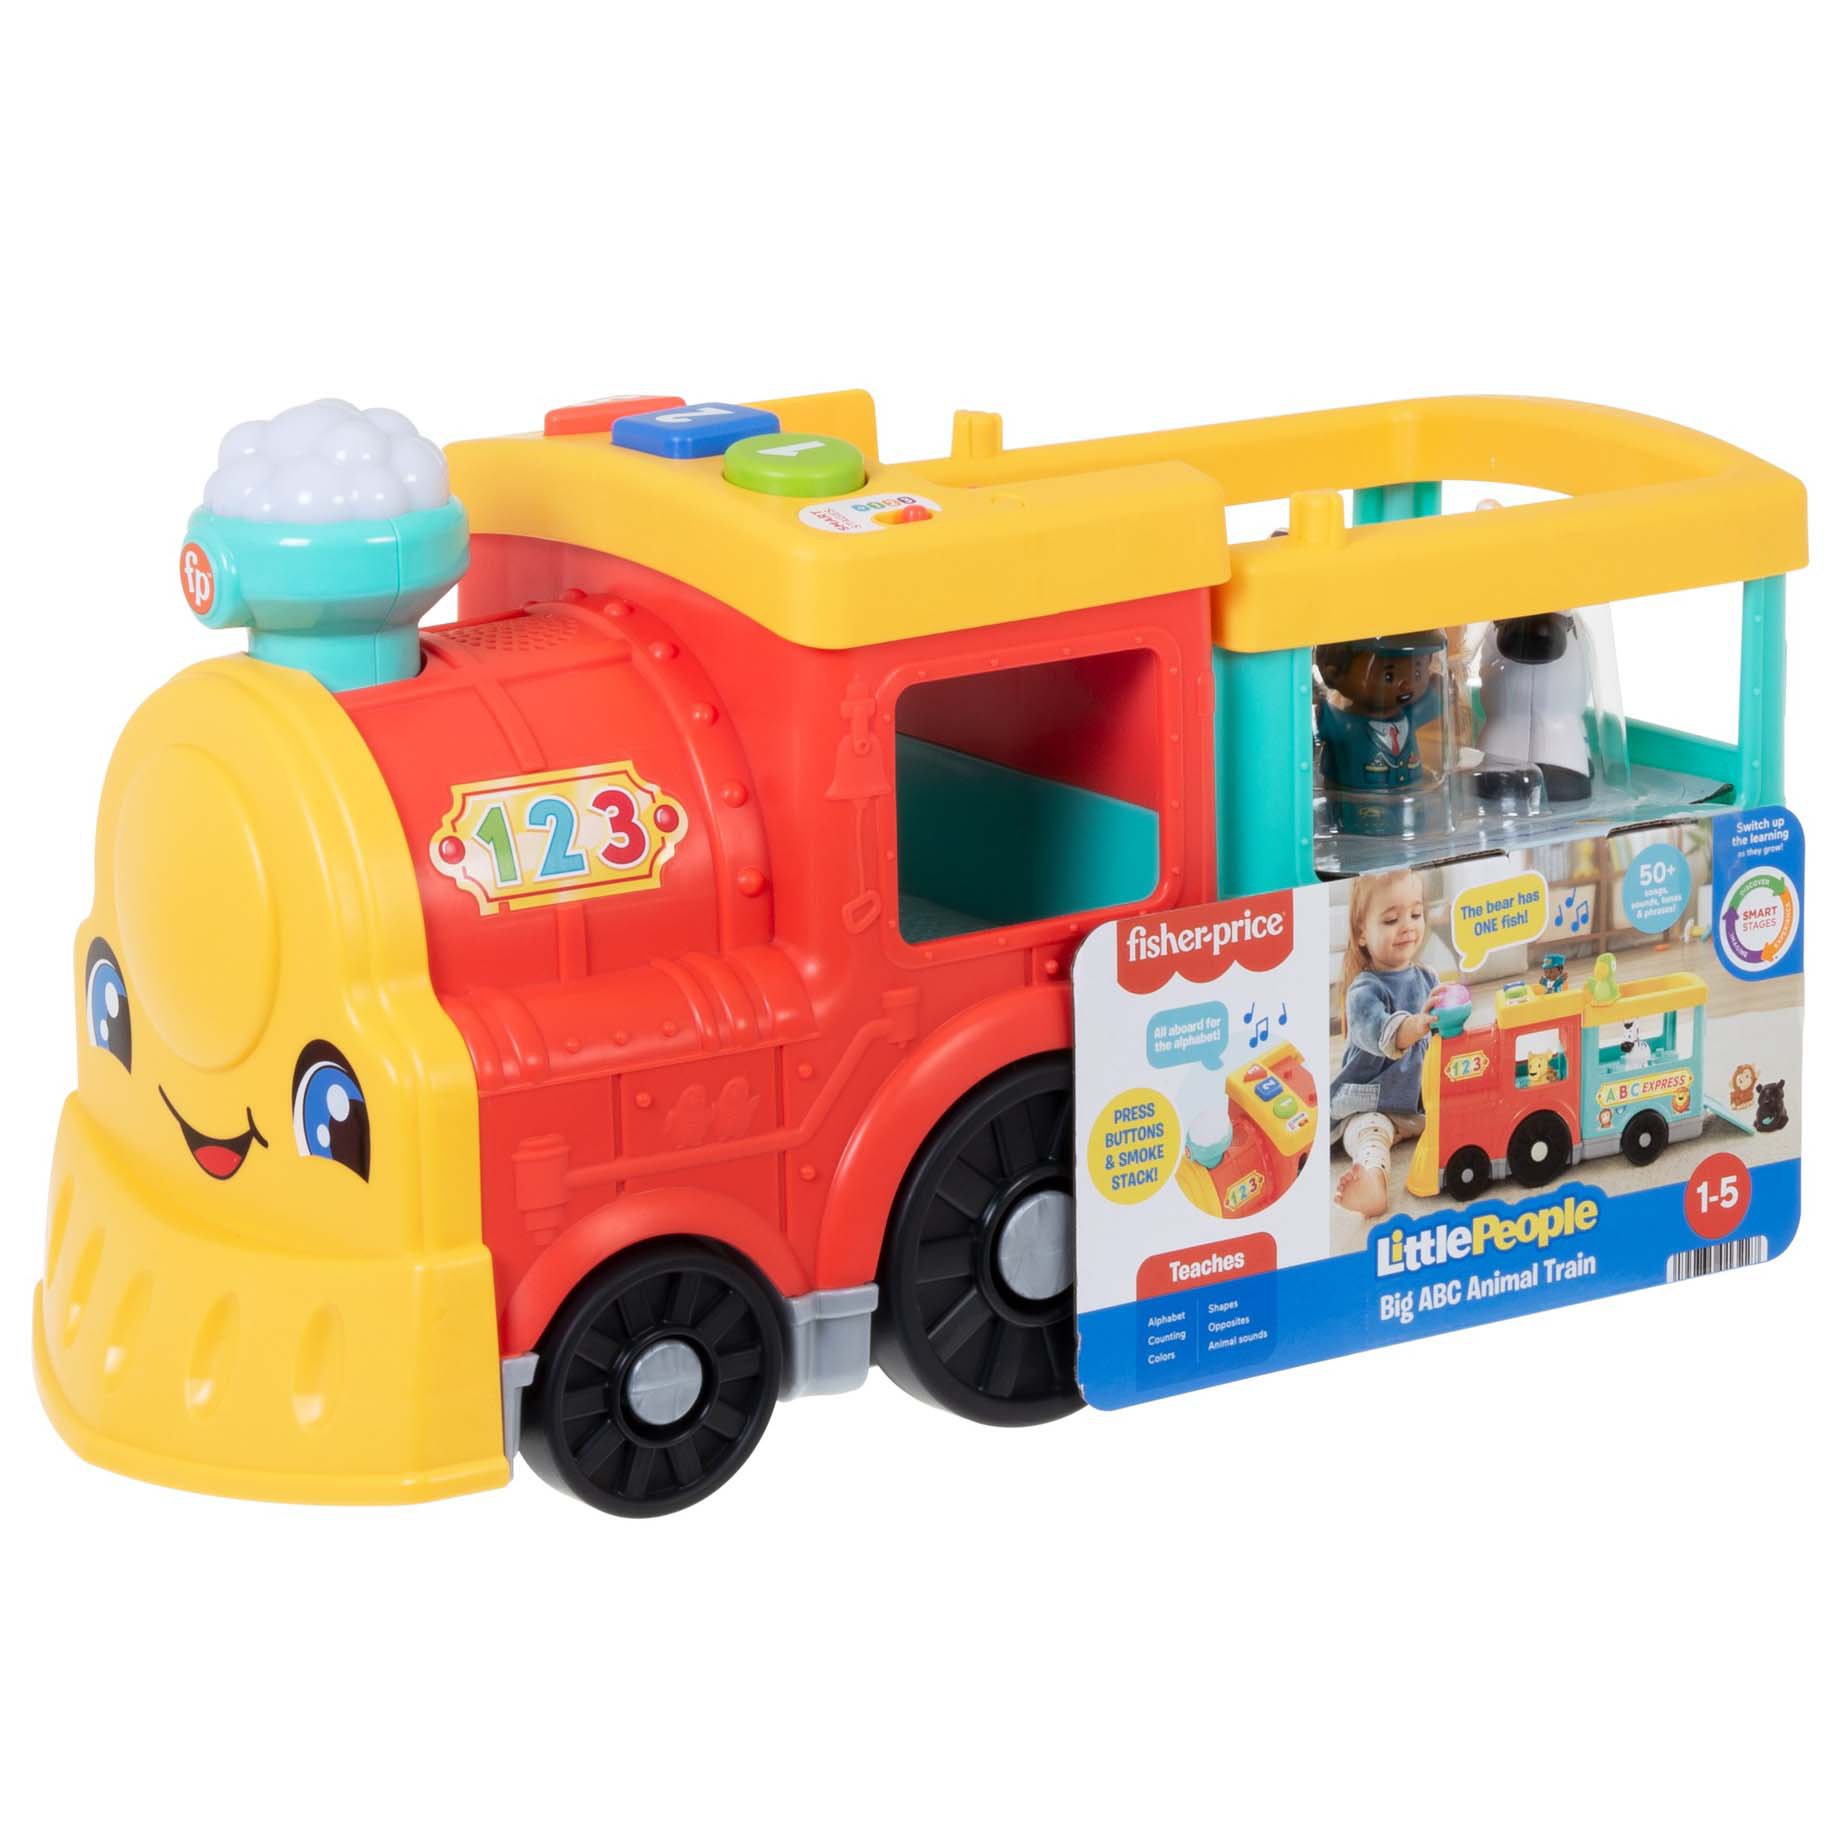 Fisher-Price Little People Big ABC Animal Train - Shop Baby Toys at H-E-B